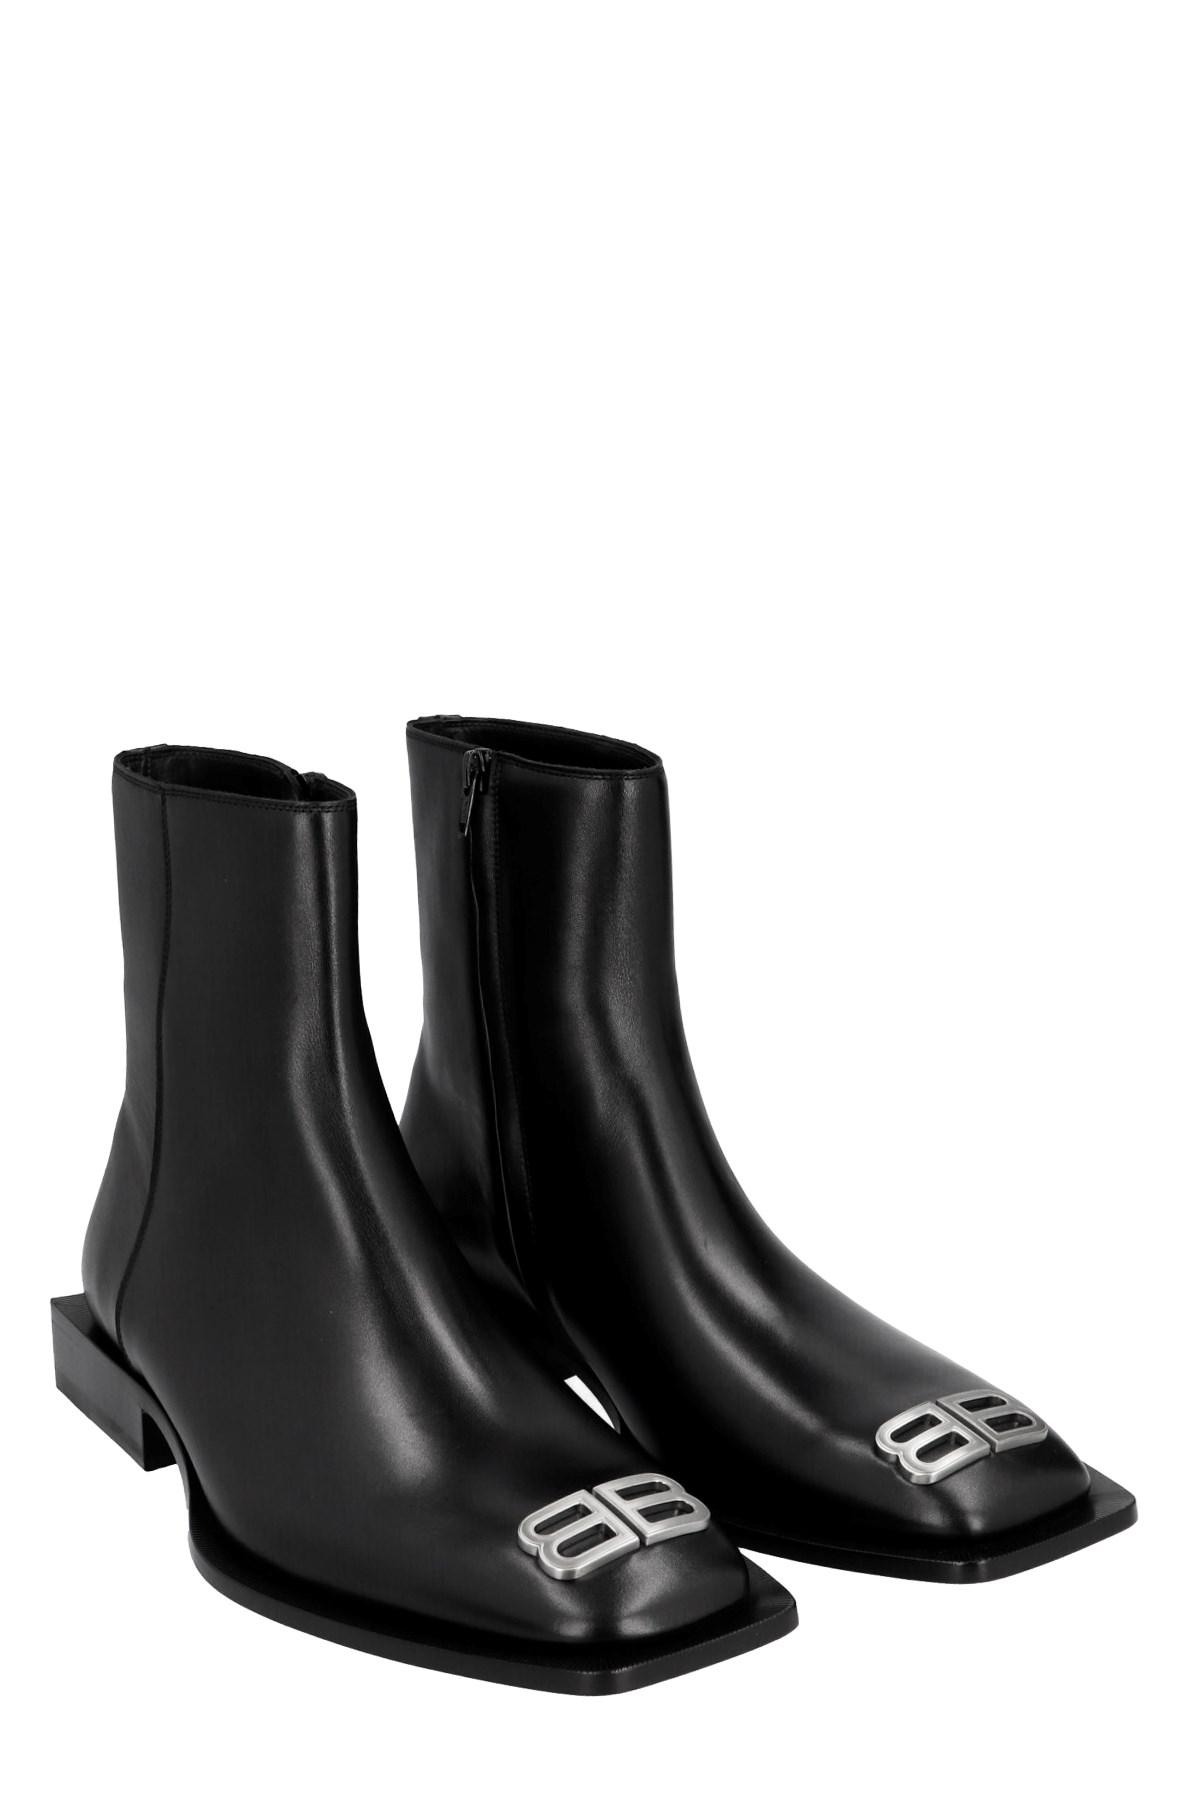 Balenciaga Leather 'flat Rim Bootie' Ankle Boots in Black for Men - Lyst